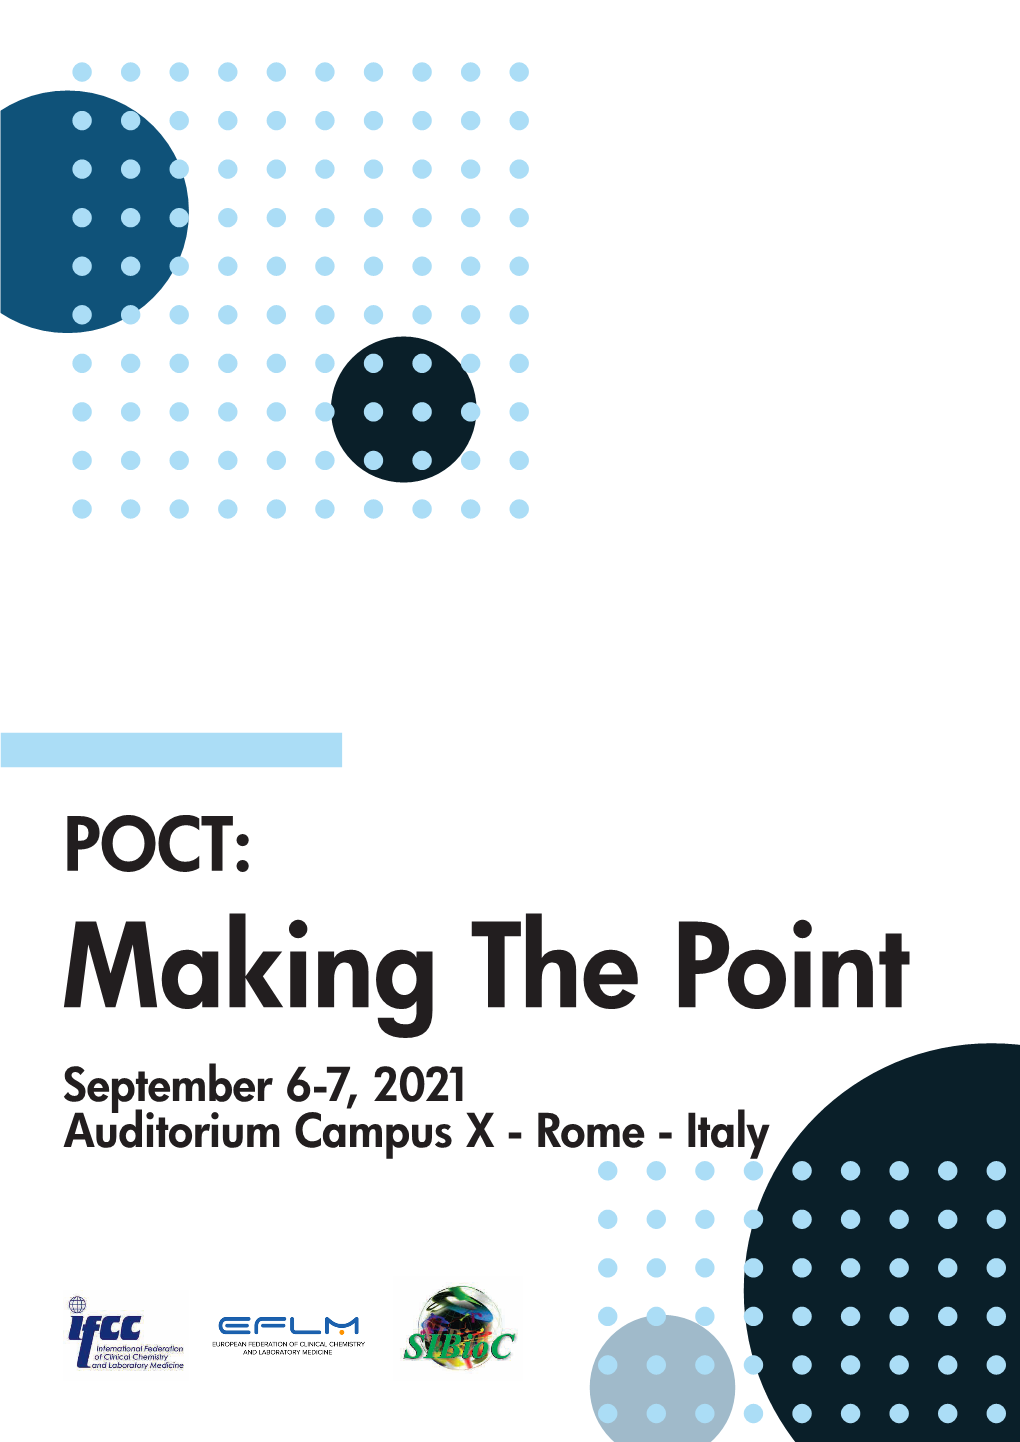 POCT: Making the Point September 6-7, 2021 Auditorium Campus X - Rome - Italy Outline Programme Day 1